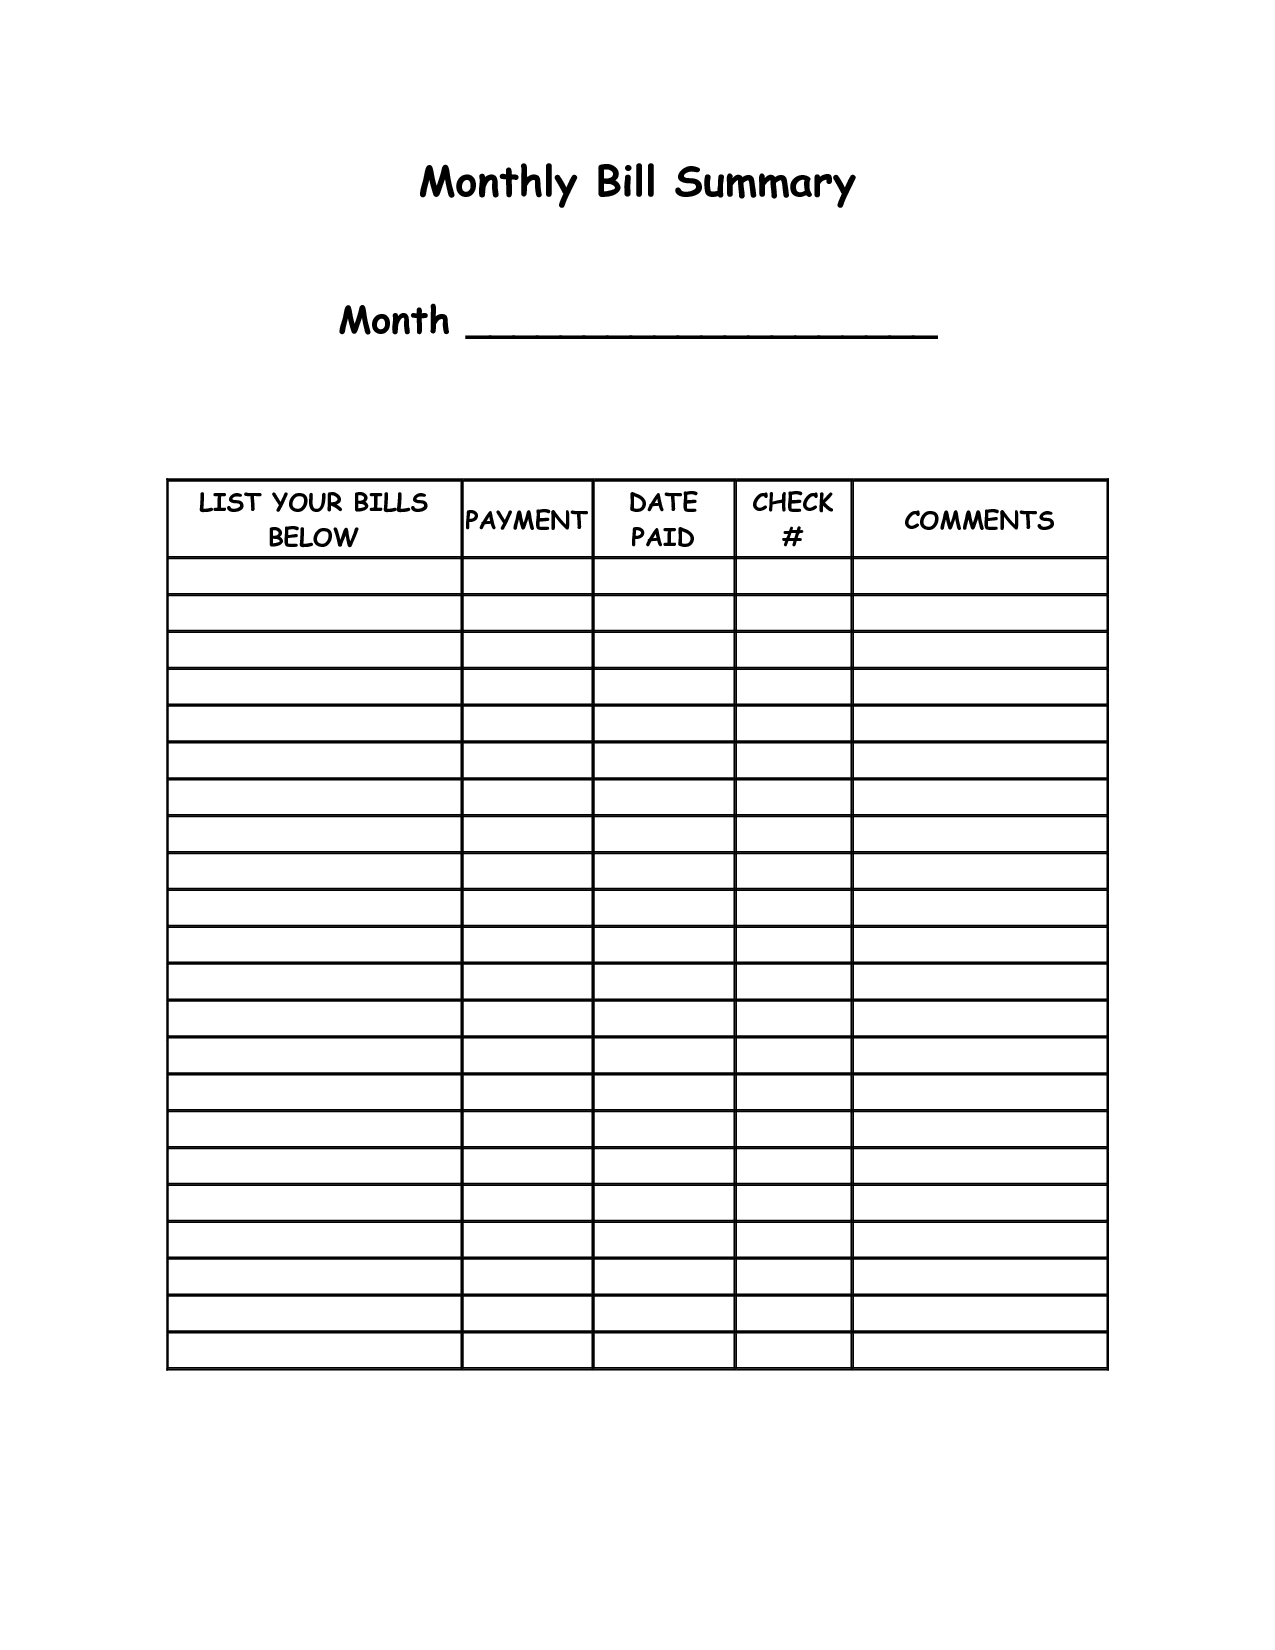 Monthly Bill Summary Doc | Organization | Organizing Monthly Bills - Free Printable Bill Payment Schedule